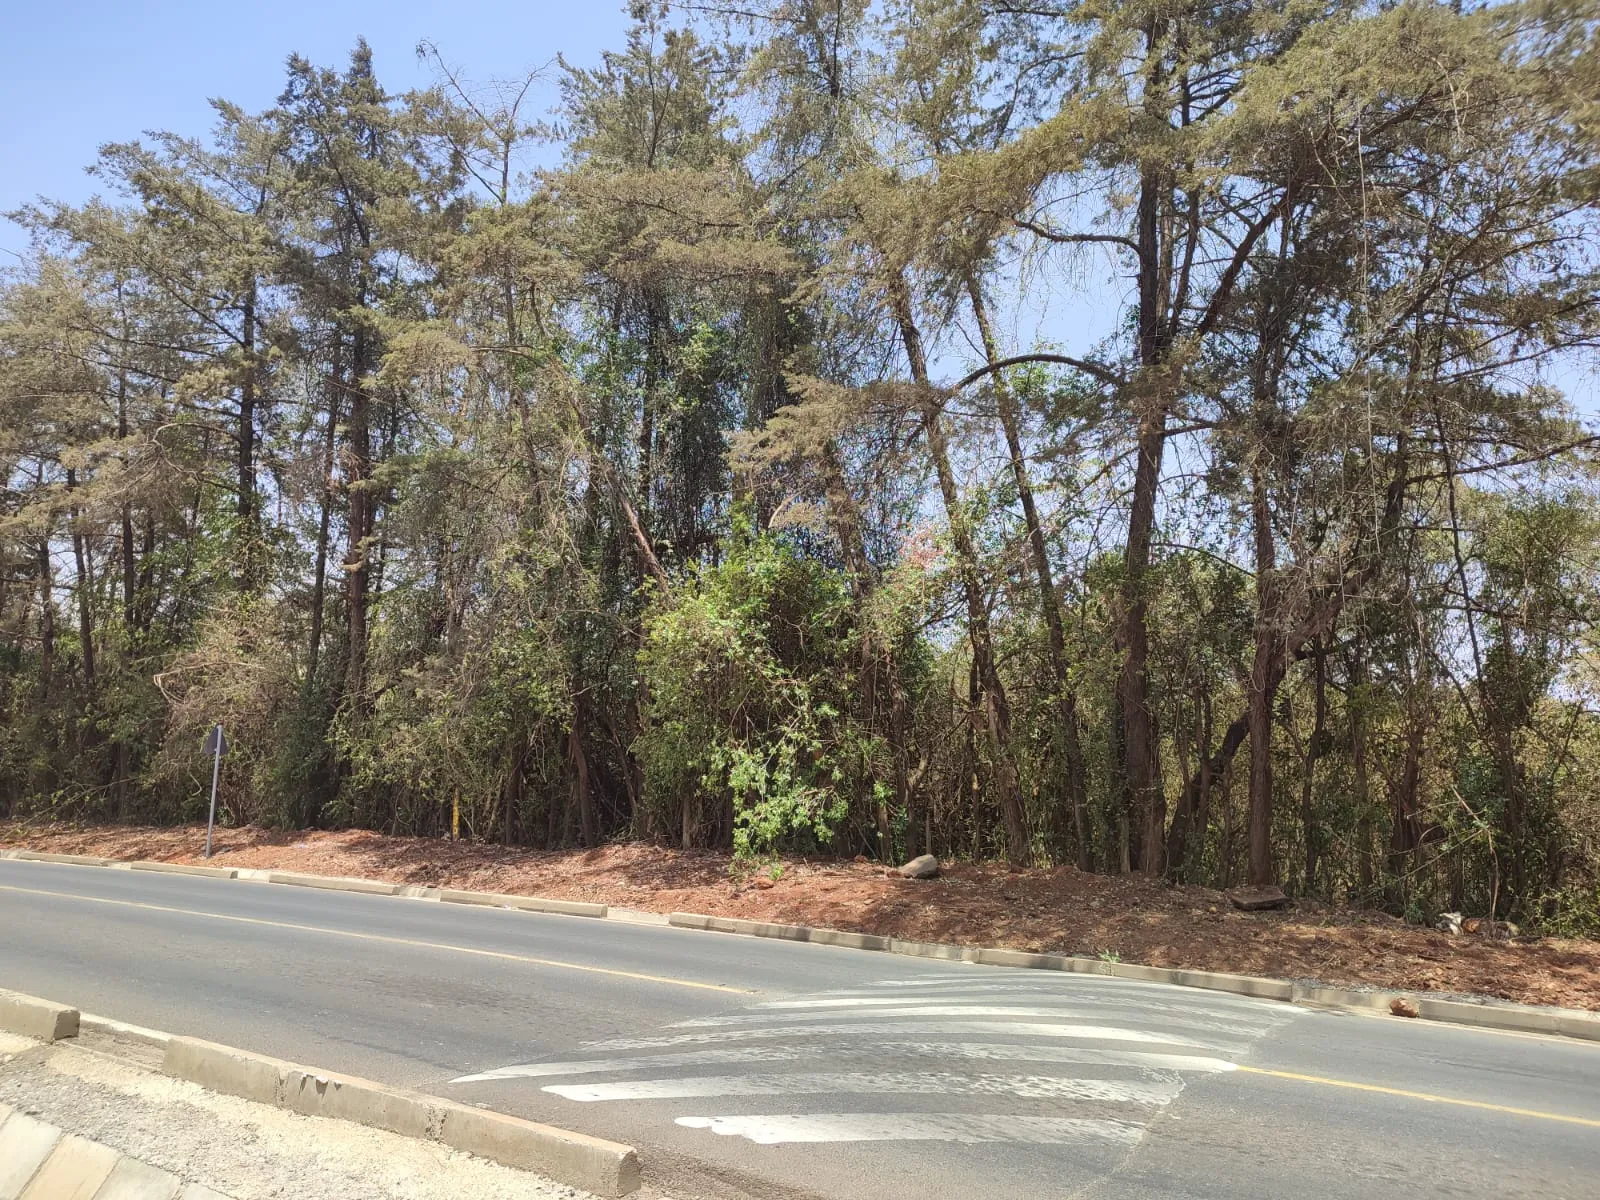 Karen land for sale 4 half acre plots in Hardy Masai West Road Ready Tittle Deed Exclusive!